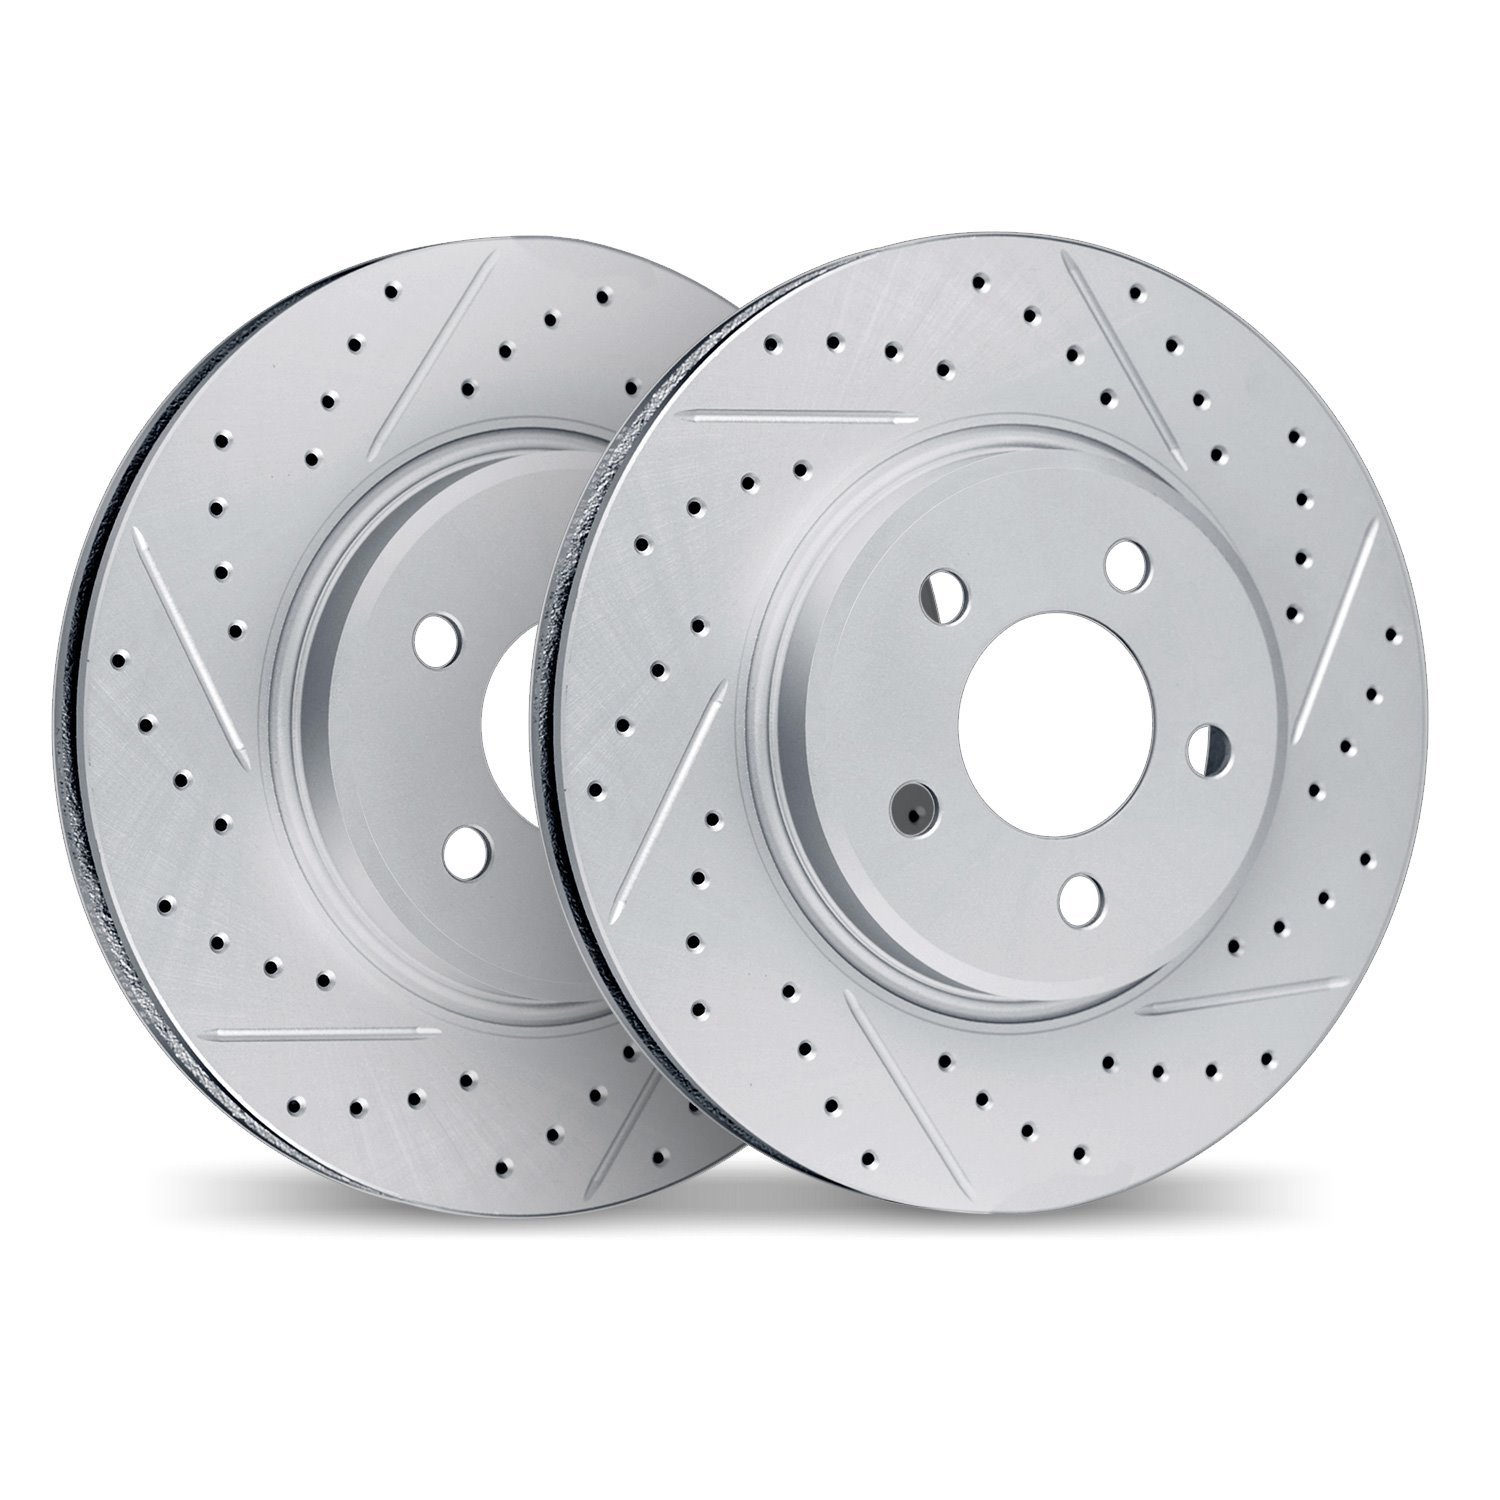 2002-75017 Geoperformance Drilled/Slotted Brake Rotors, 2013-2020 Lexus/Toyota/Scion, Position: Rear